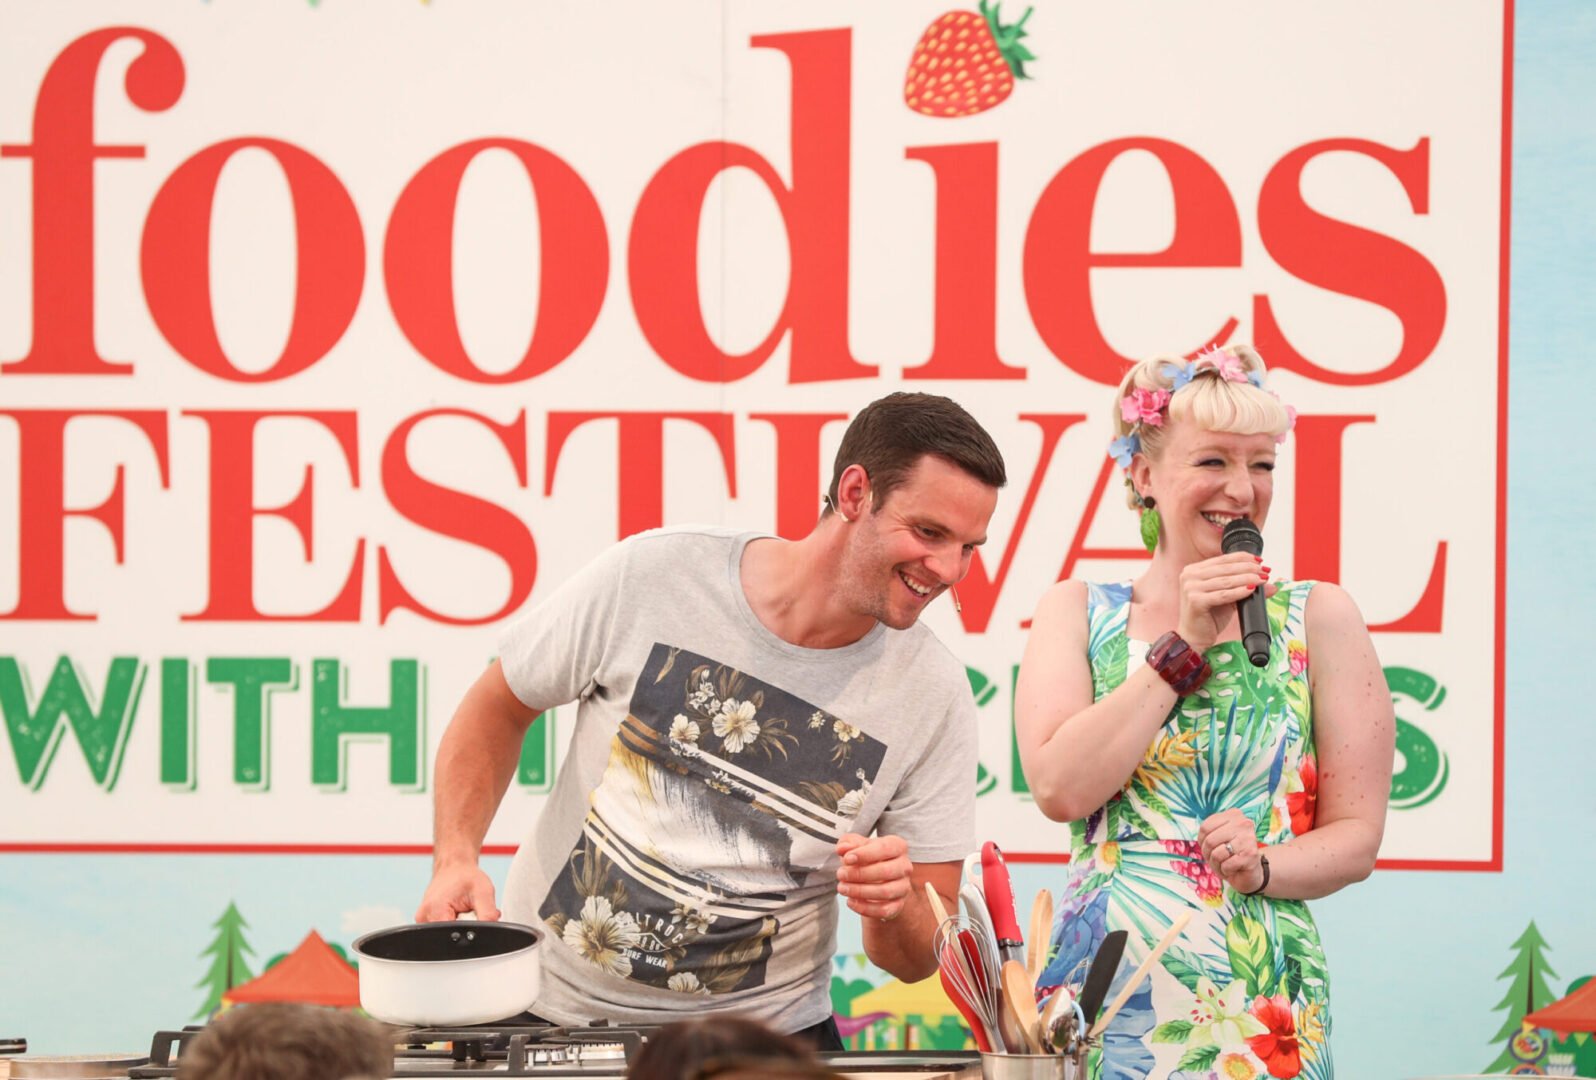 Cooking demonsatrations at the Foodies Festival